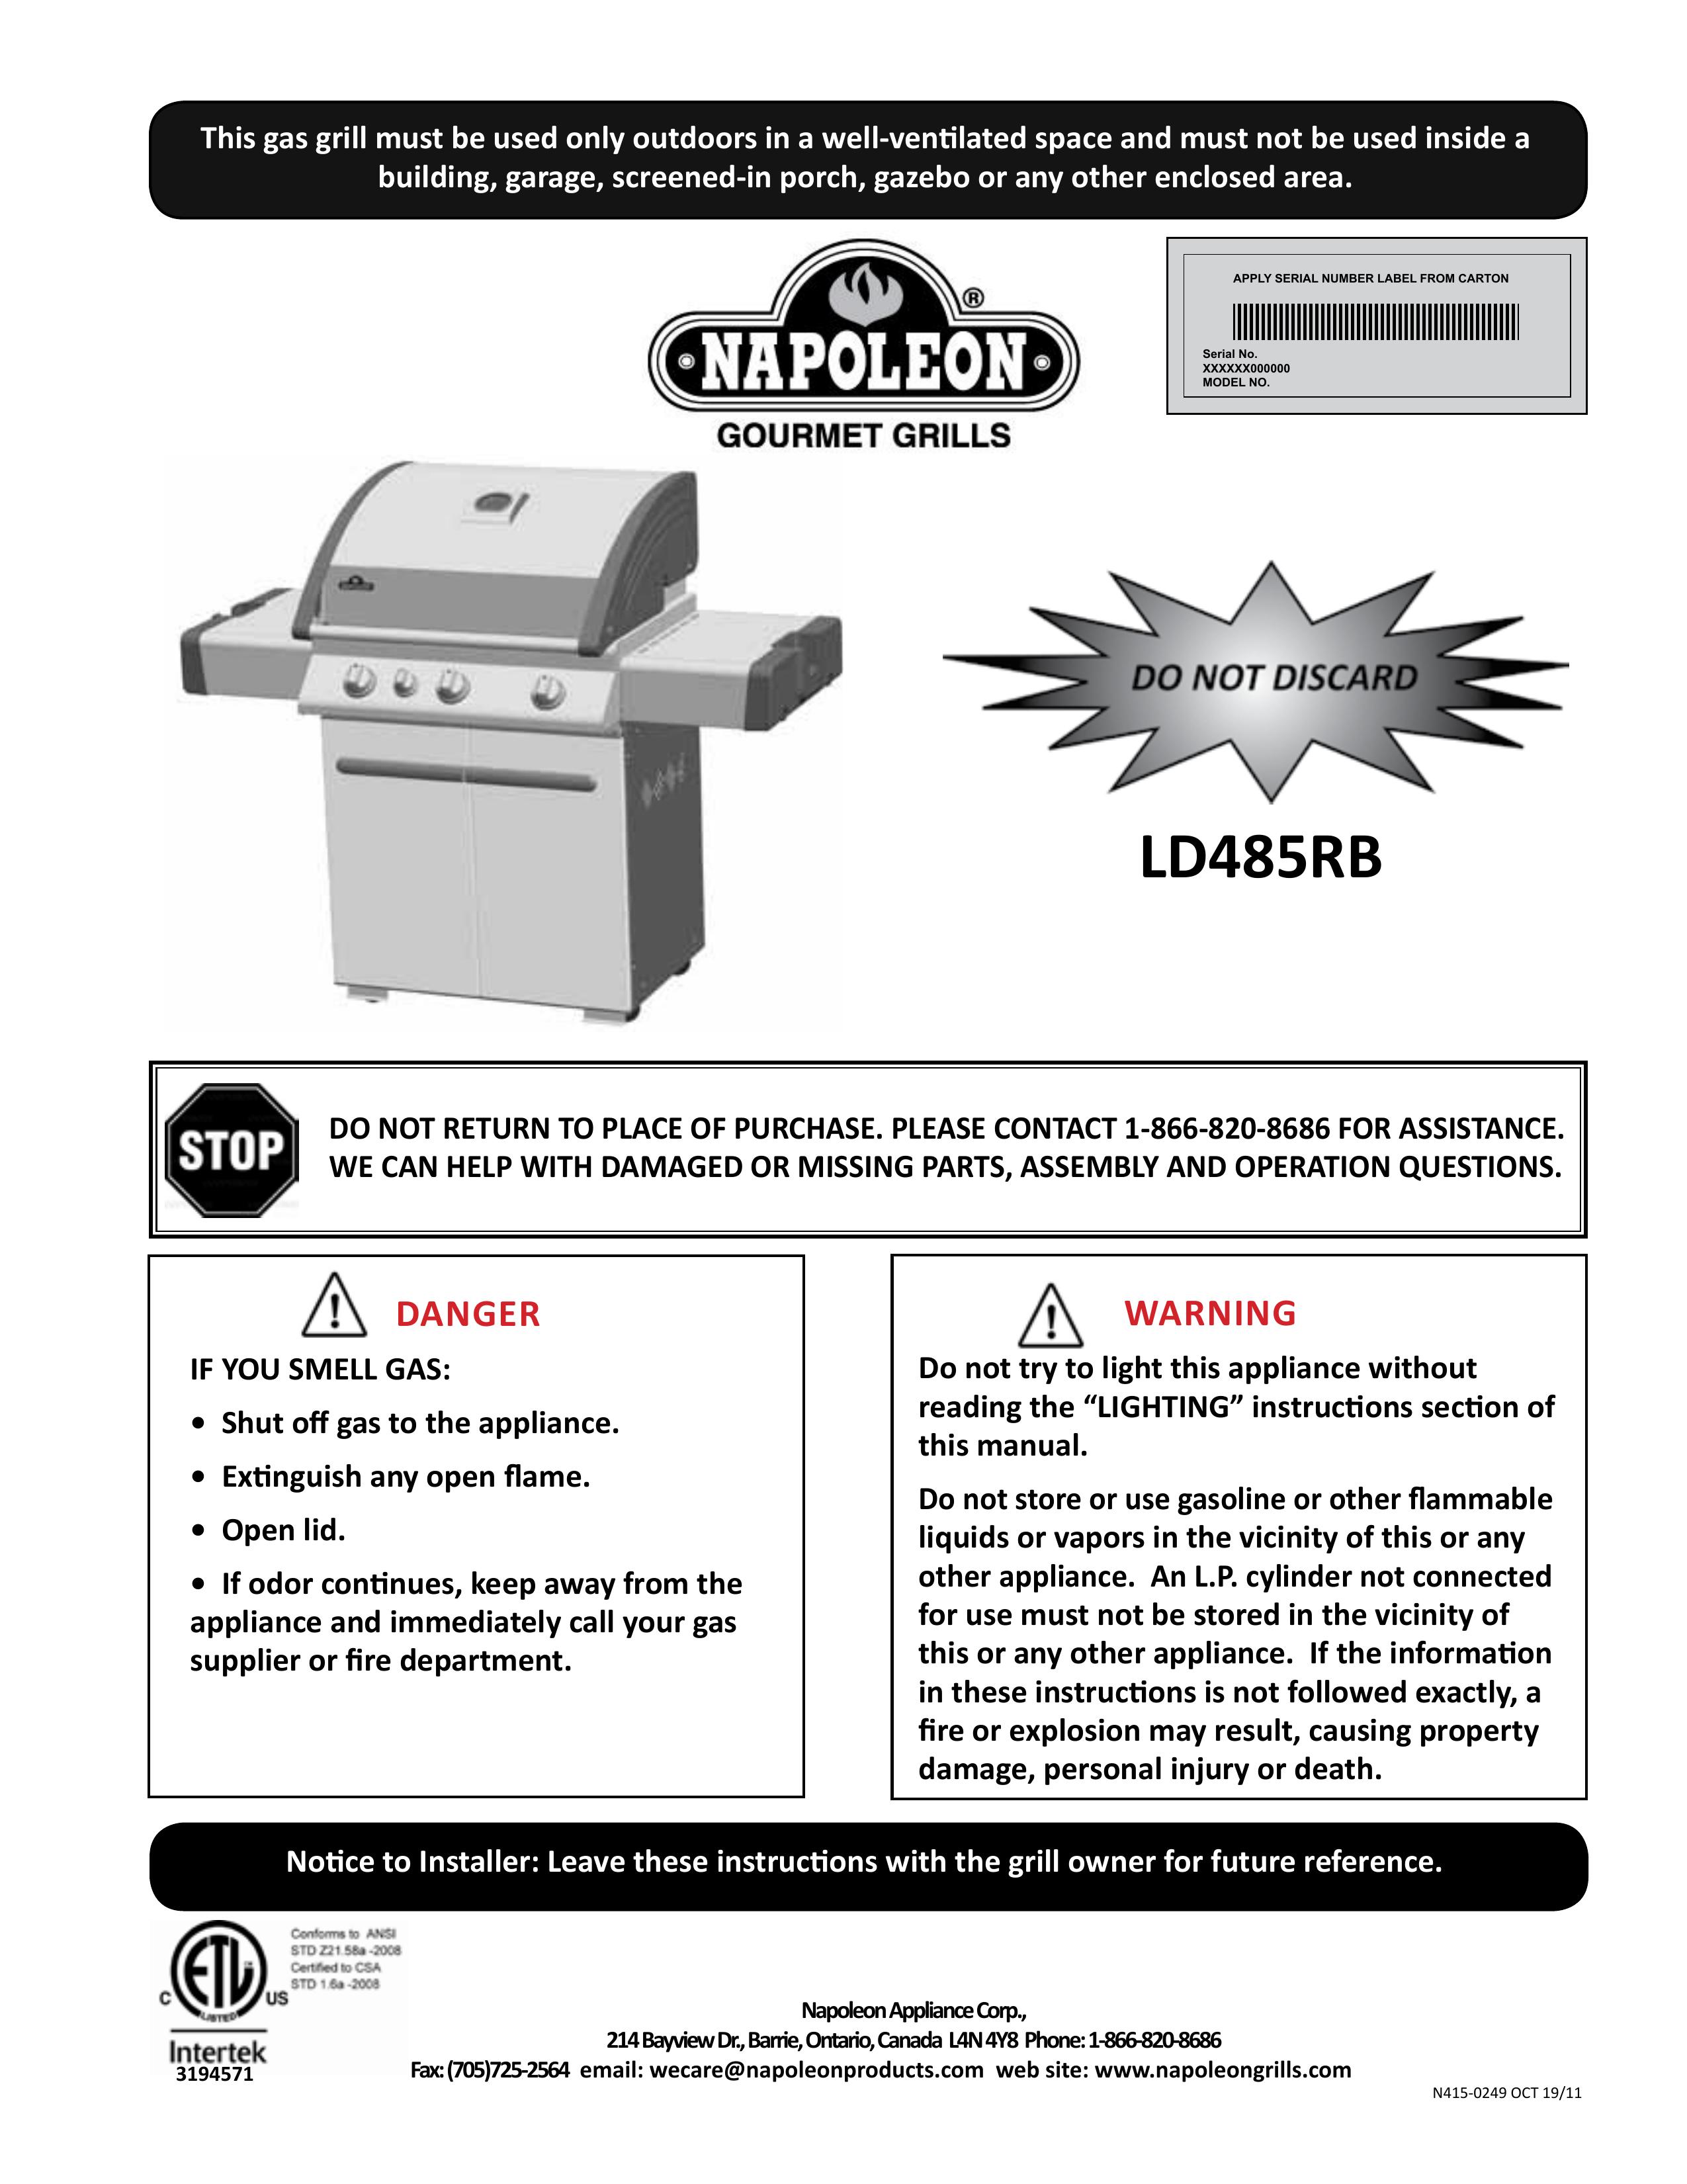 Napoleon Grills LD485RB Gas Grill User Manual